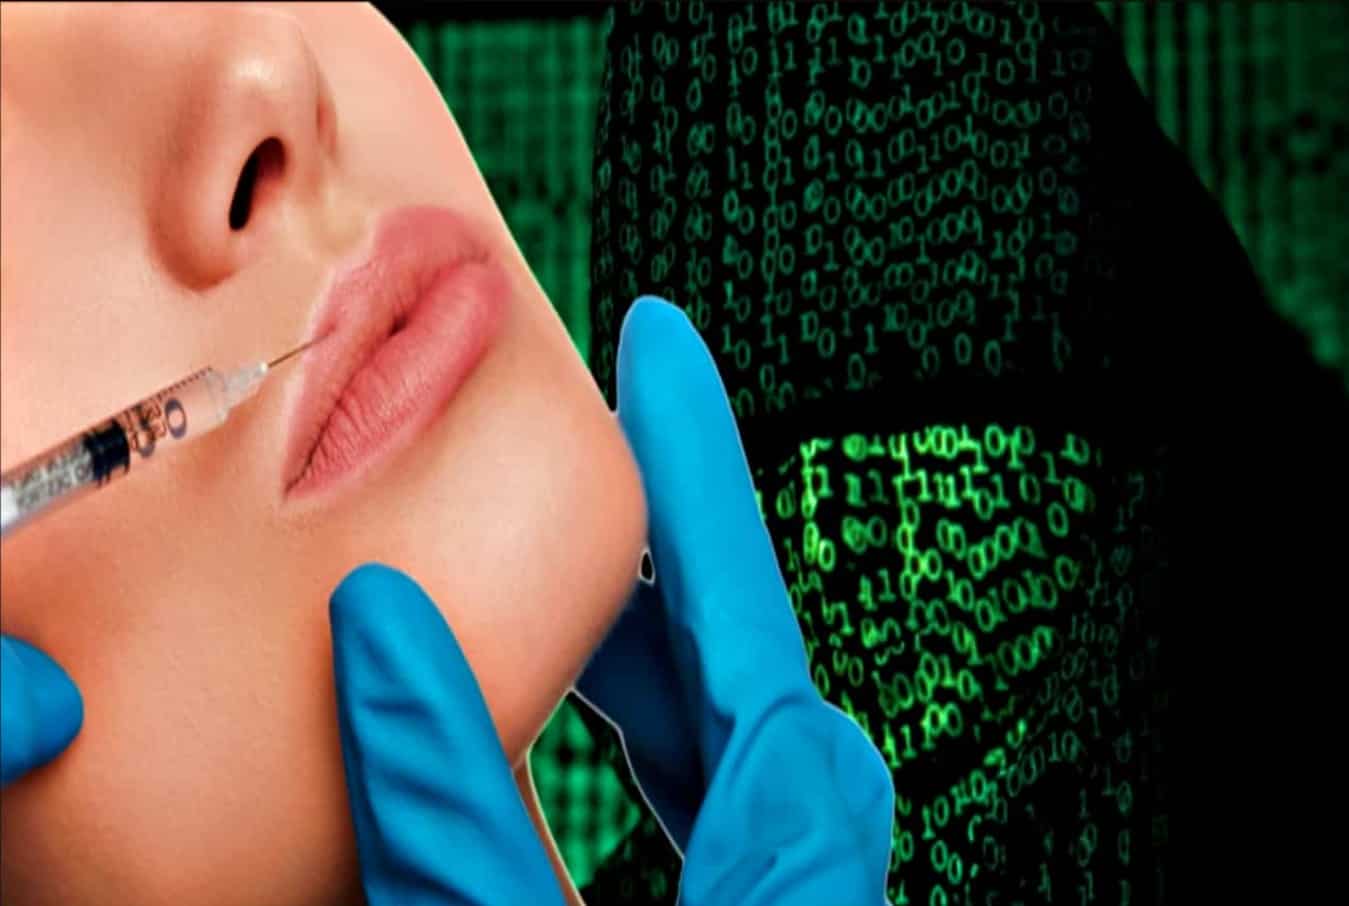 Plastic surgery company leaks images of 100,000s of customers